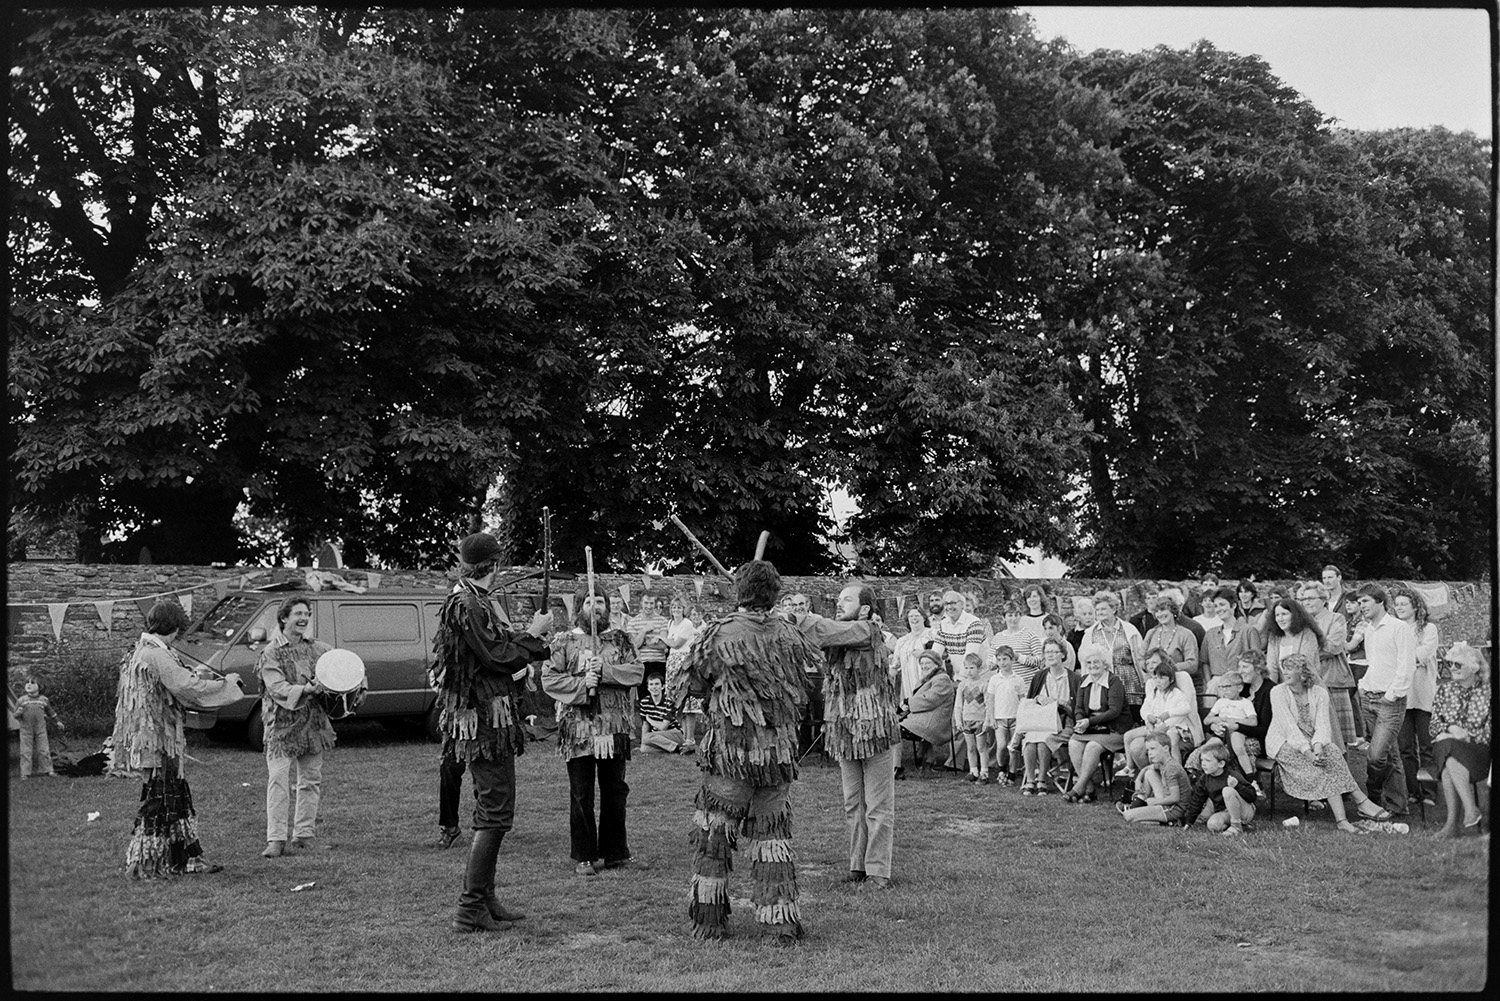 Morris men at revel.
[A group of Morris Men performing on the Village Green in Beaford at the Beaford Revel. Two of them are playing a drum and violin. They are being watched by a large group of men, women and children, some seated. A van is parked by a wall decorated with bunting in the background.]